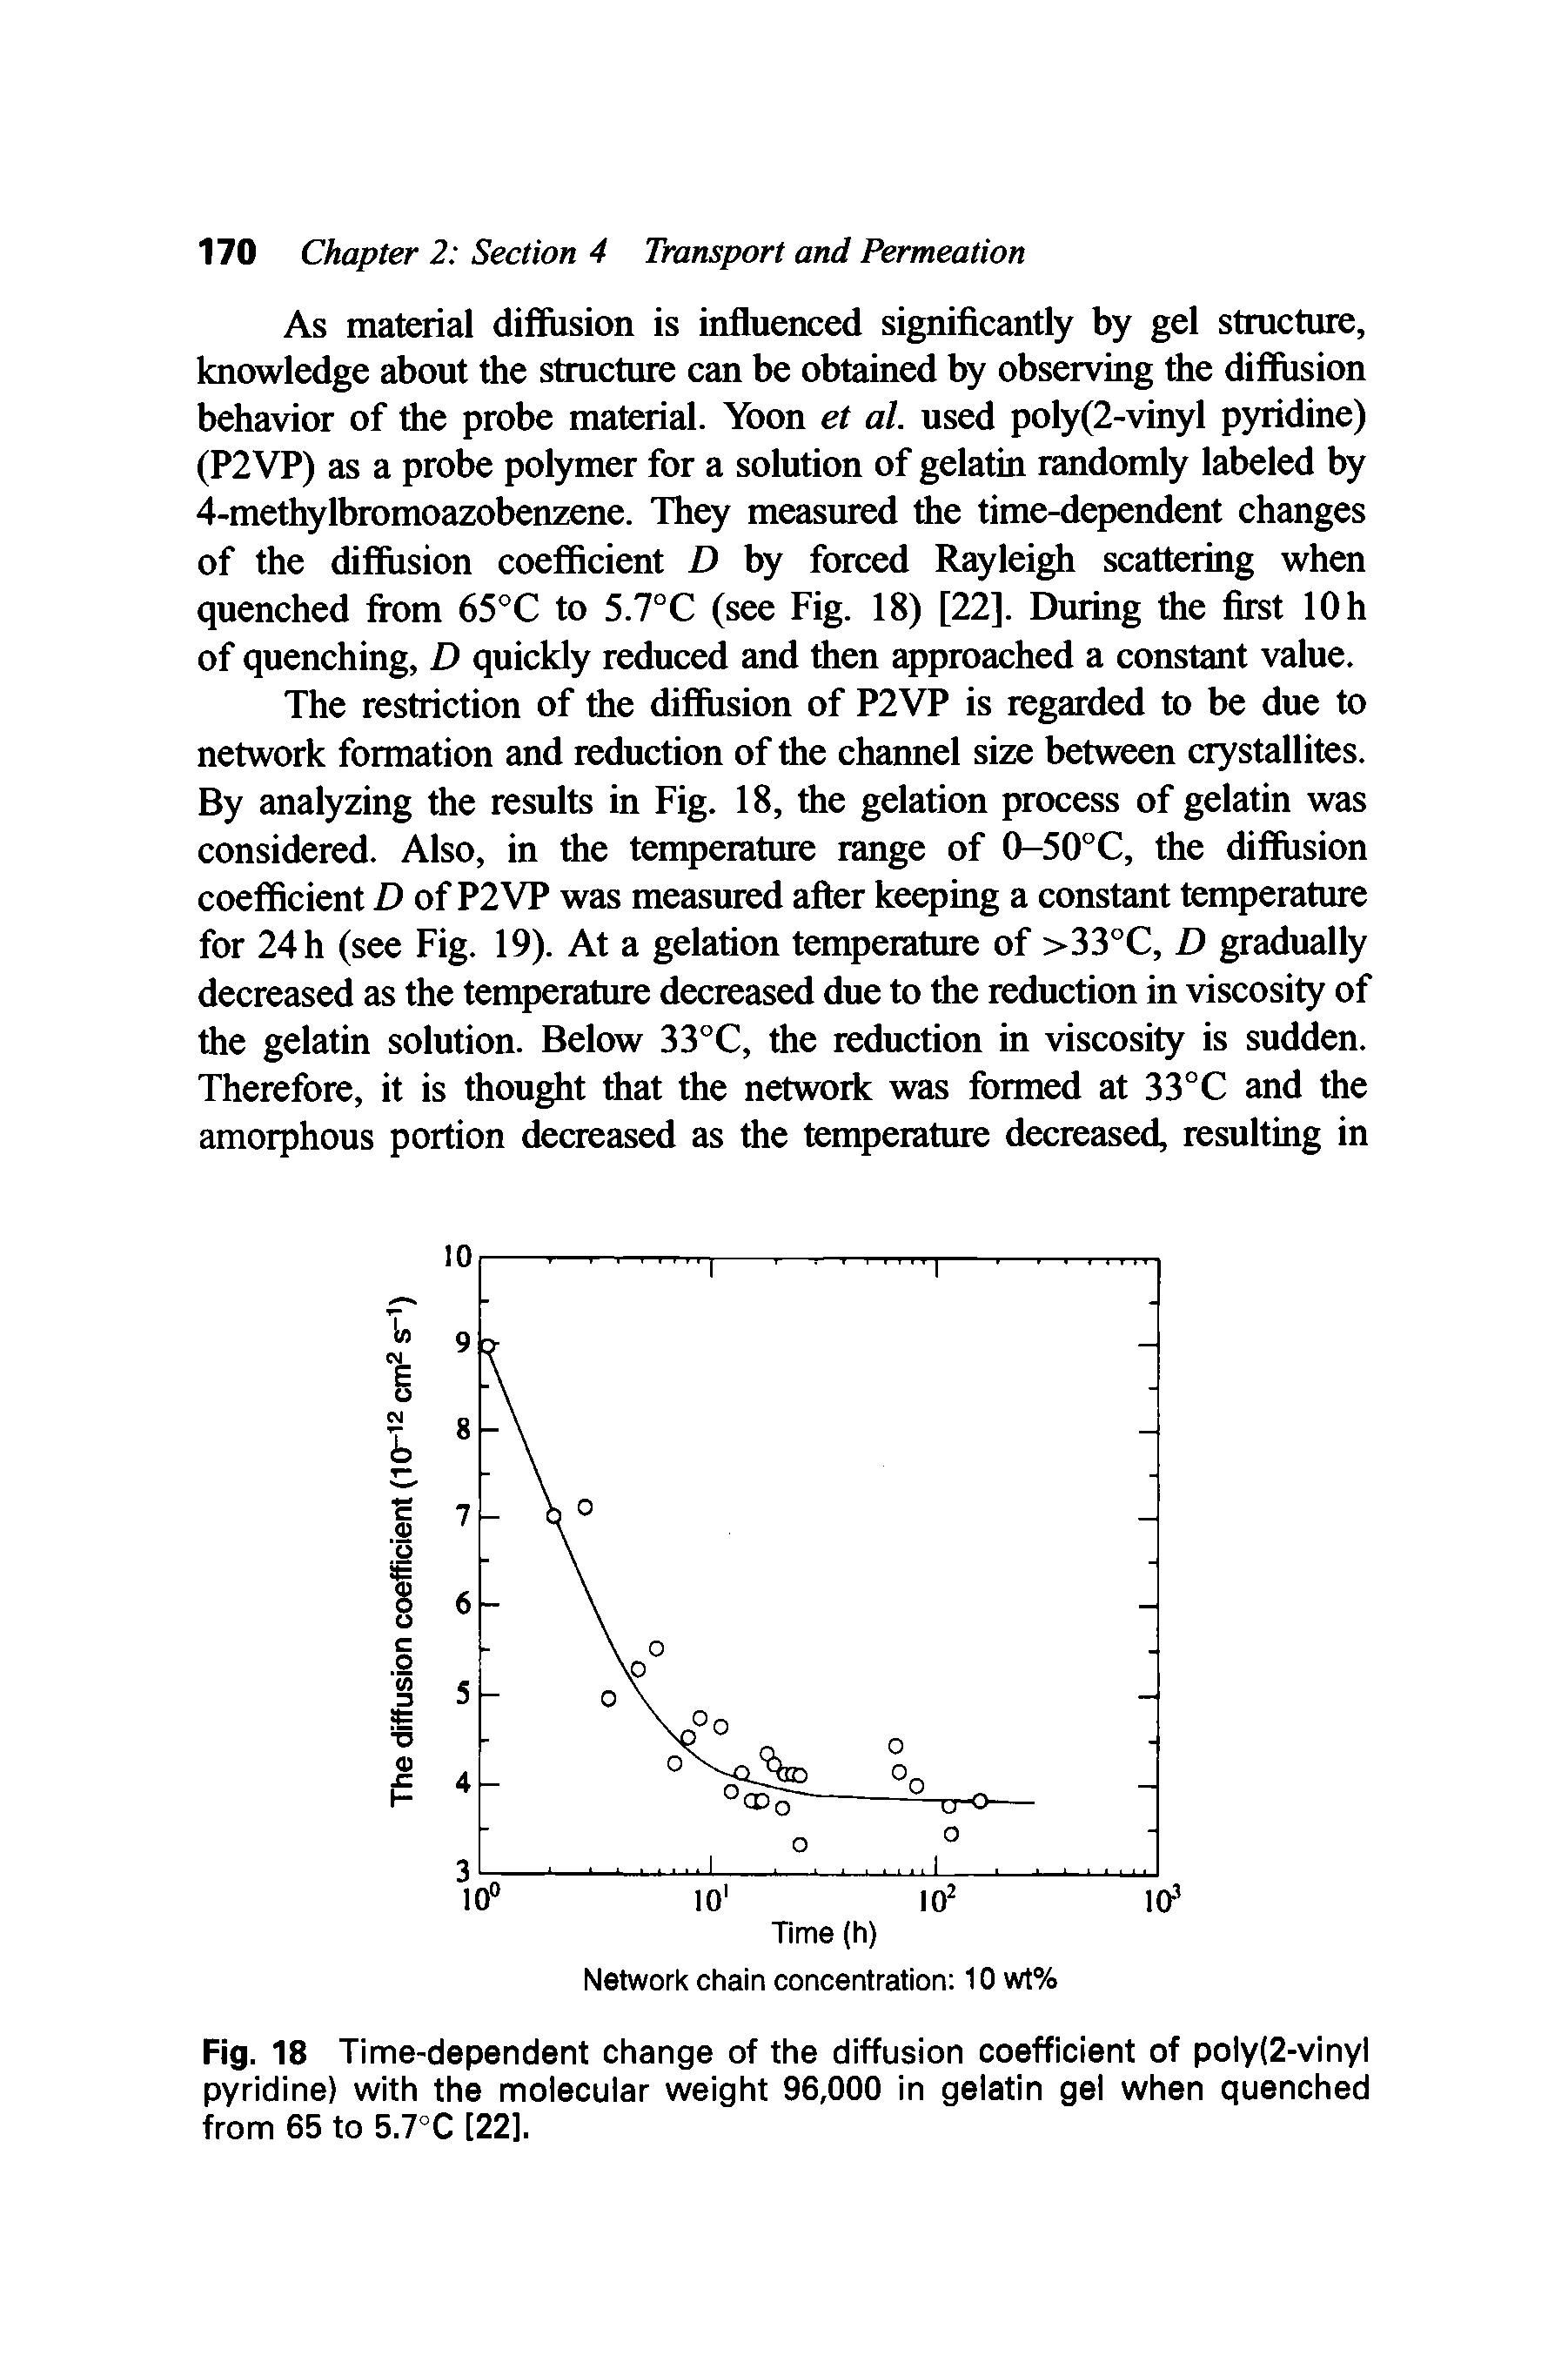 Fig. 18 Time-dependent change of the diffusion coefficient of poly(2-vinyl pyridine) with the molecular weight 96,000 in gelatin gel when quenched from 65 to 5.7°C [22].